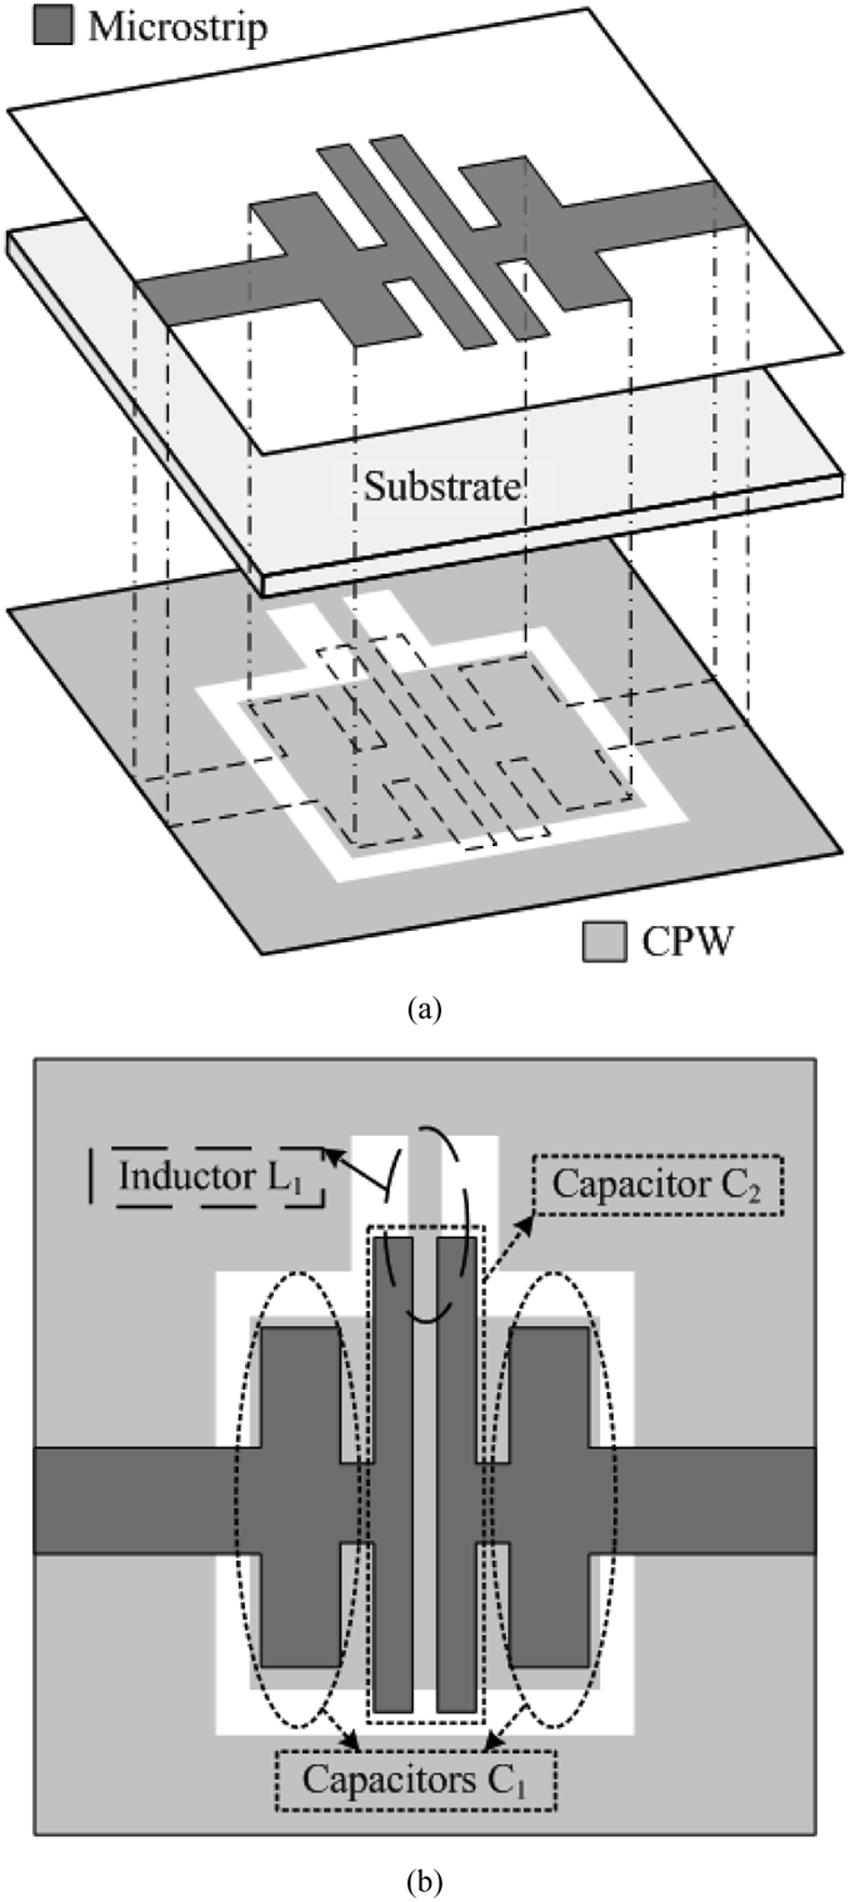 3774 IEEE TRANSACTIONS ON MICROWAVE THEORY AND TECHNIQUES, VOL. 54, NO. 10, OCTOBER 2006 Fig. 5. Top-/bottom-layer circuit layouts of proposed three-pole UWB bandpass filter.